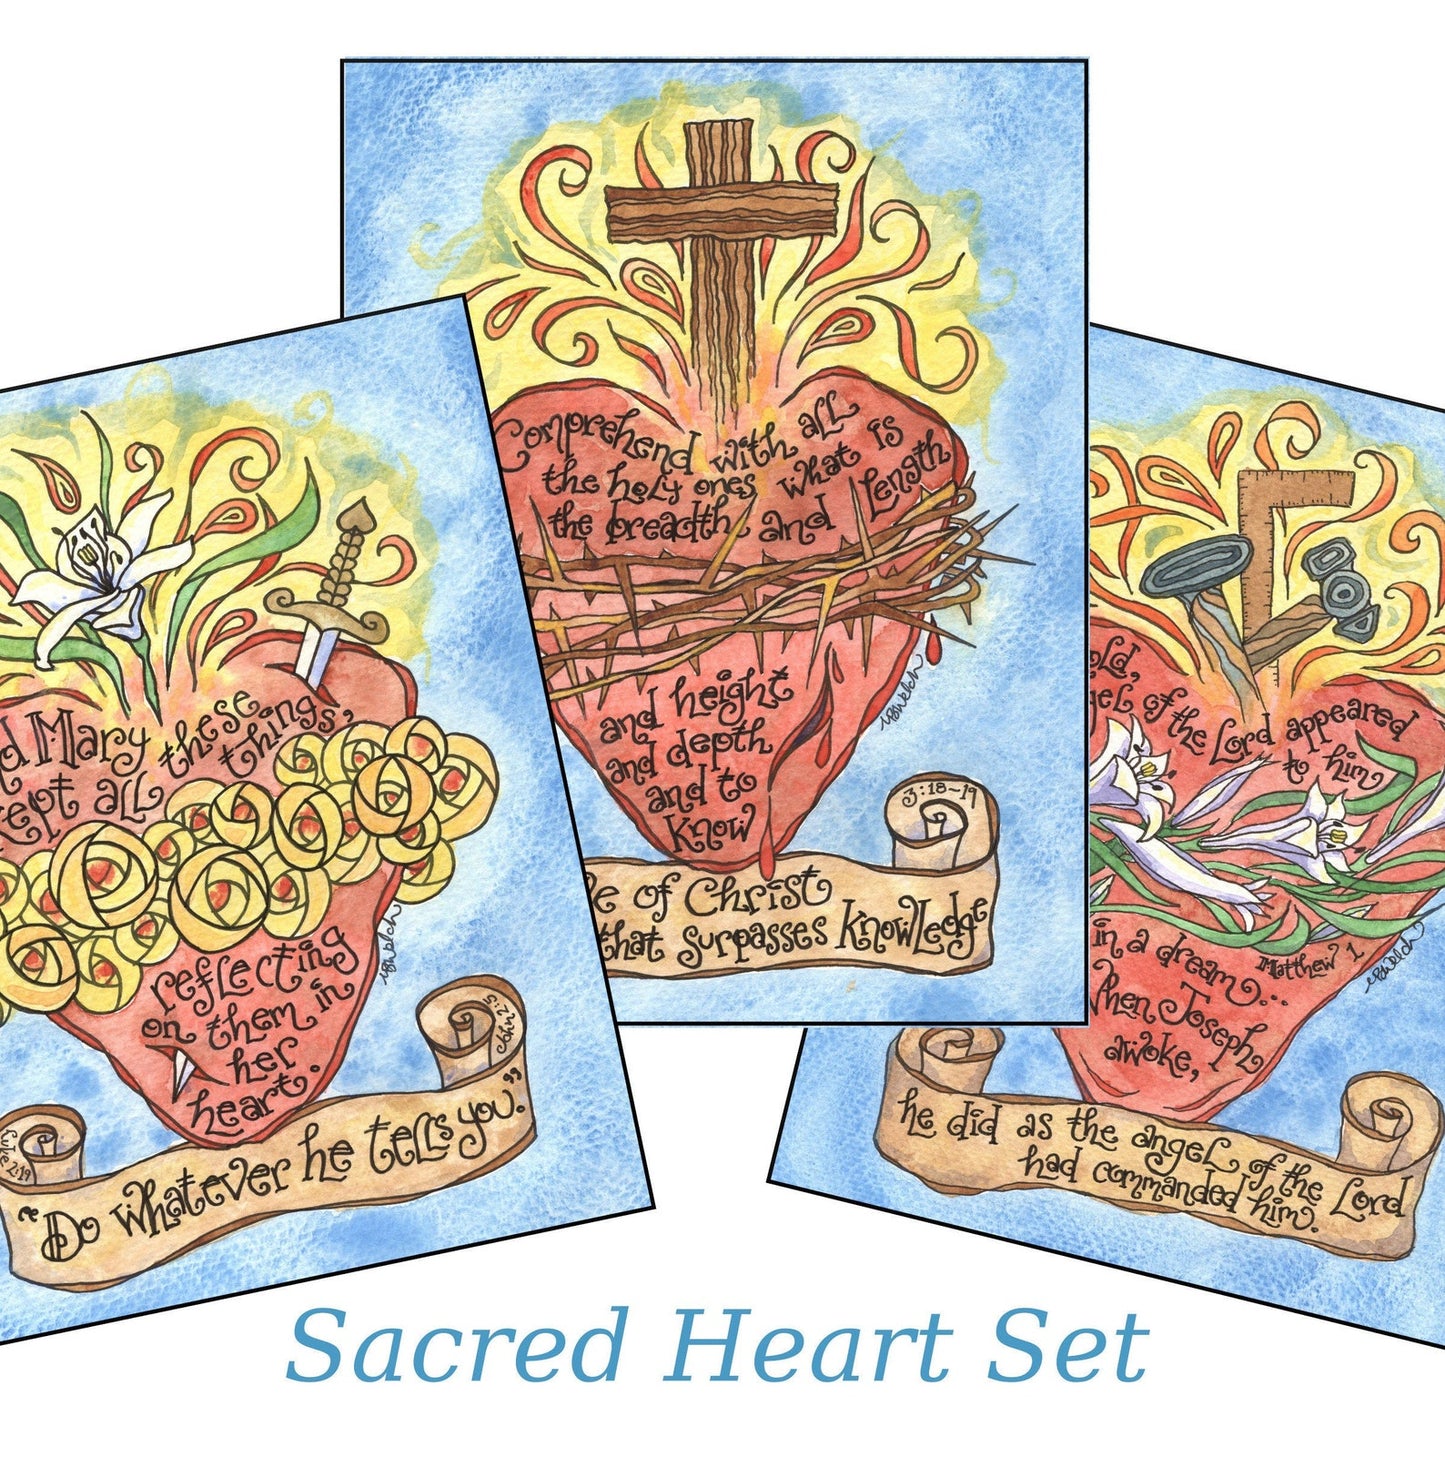 Sacred, Immaculate and Chaste Hearts Artwork